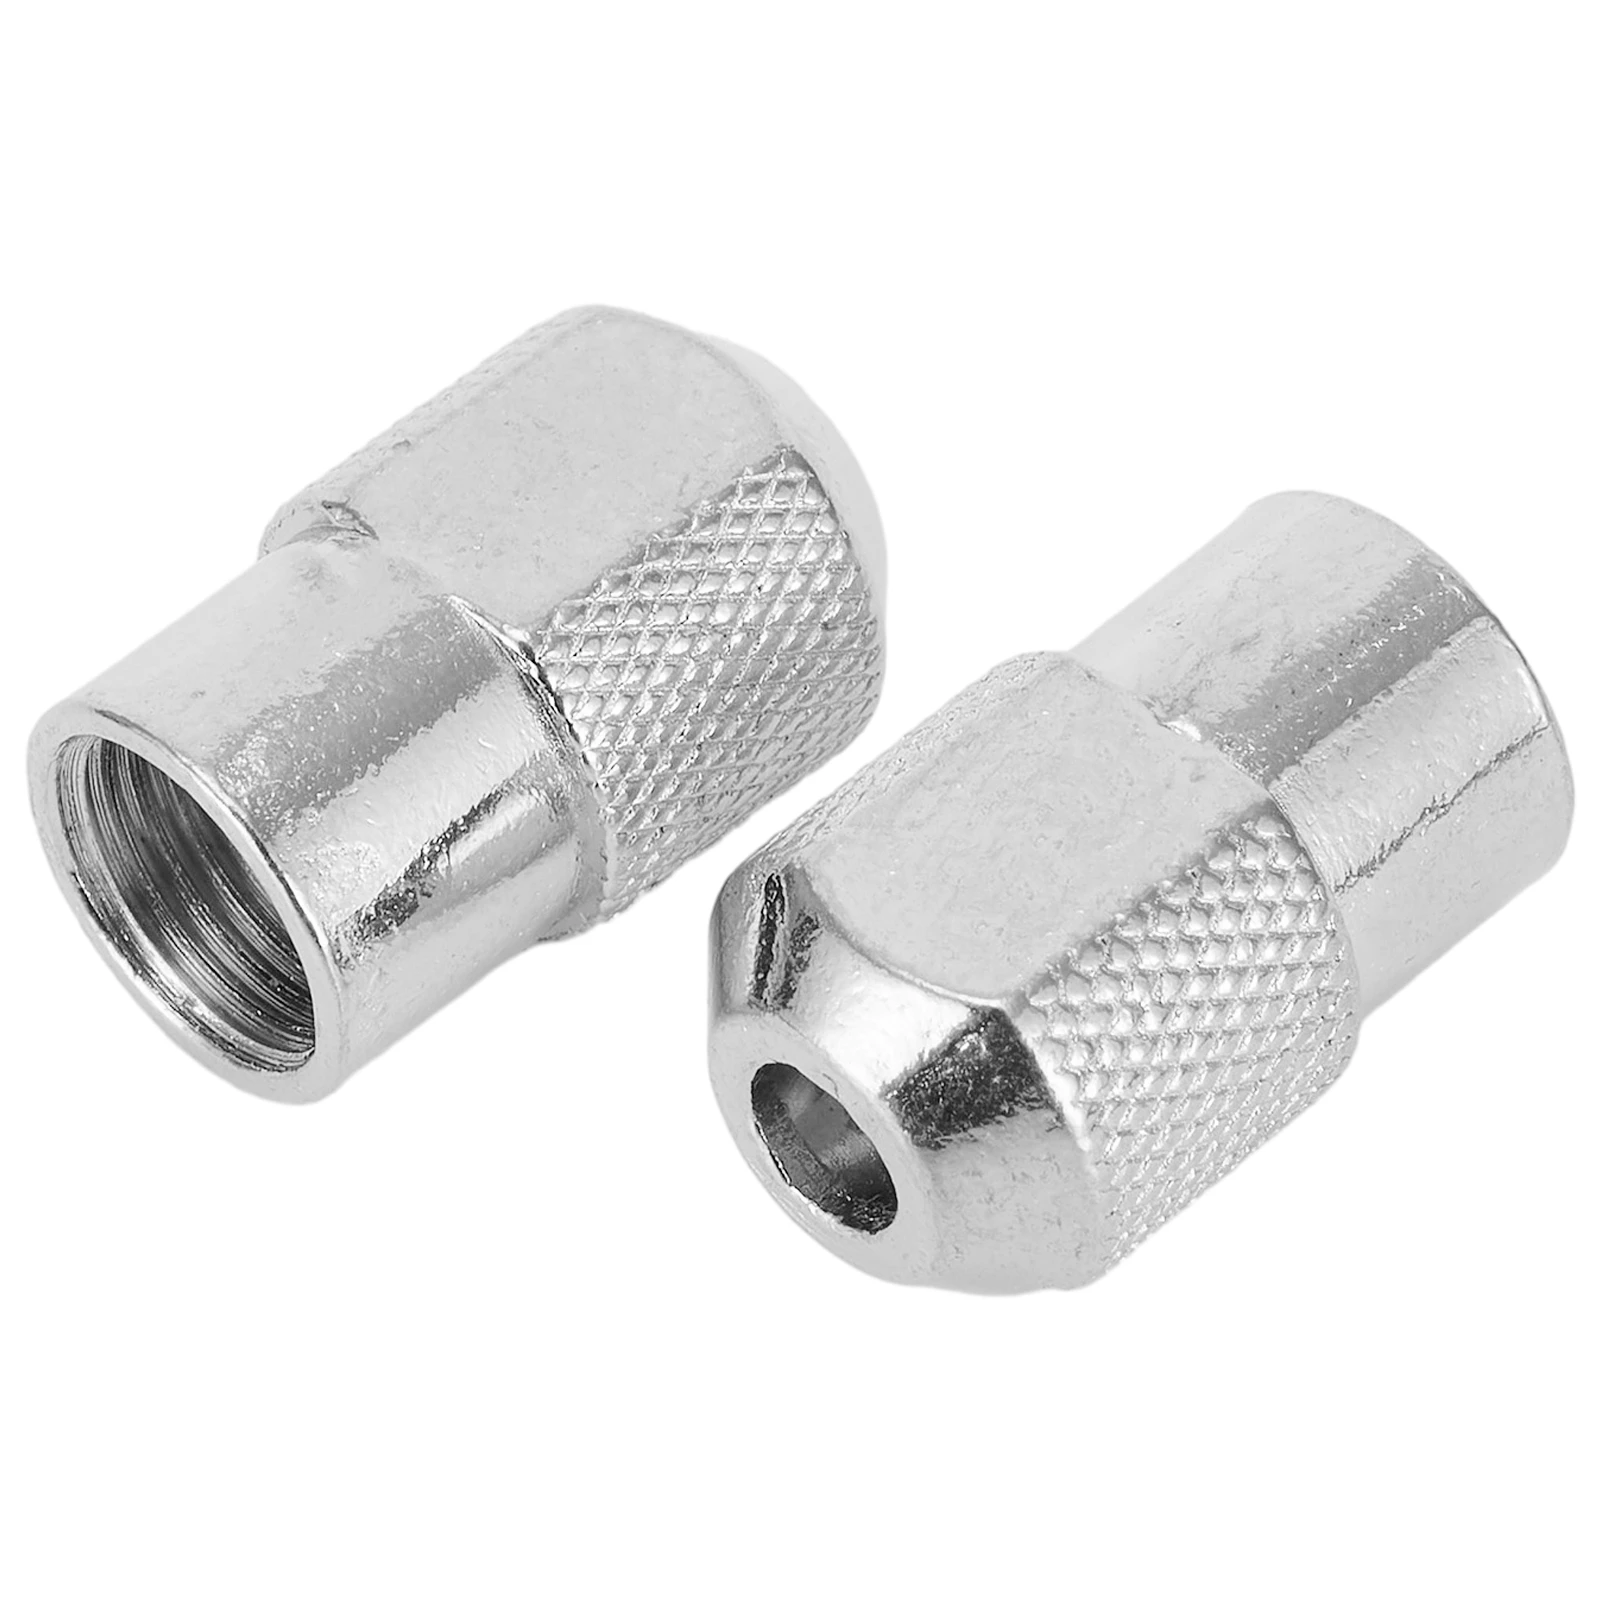 5pcs M8X0.75mm Drill Chuck Electric Mill Shaft Screw Cap Nut Collet For Electric Mill Grinder Shaft Rotary Tool Power Tools Acce cardboard for abs plate chuck adapter collet mini drilling tool drill collet size 0 5mm 3mm 1 electric grinder cap